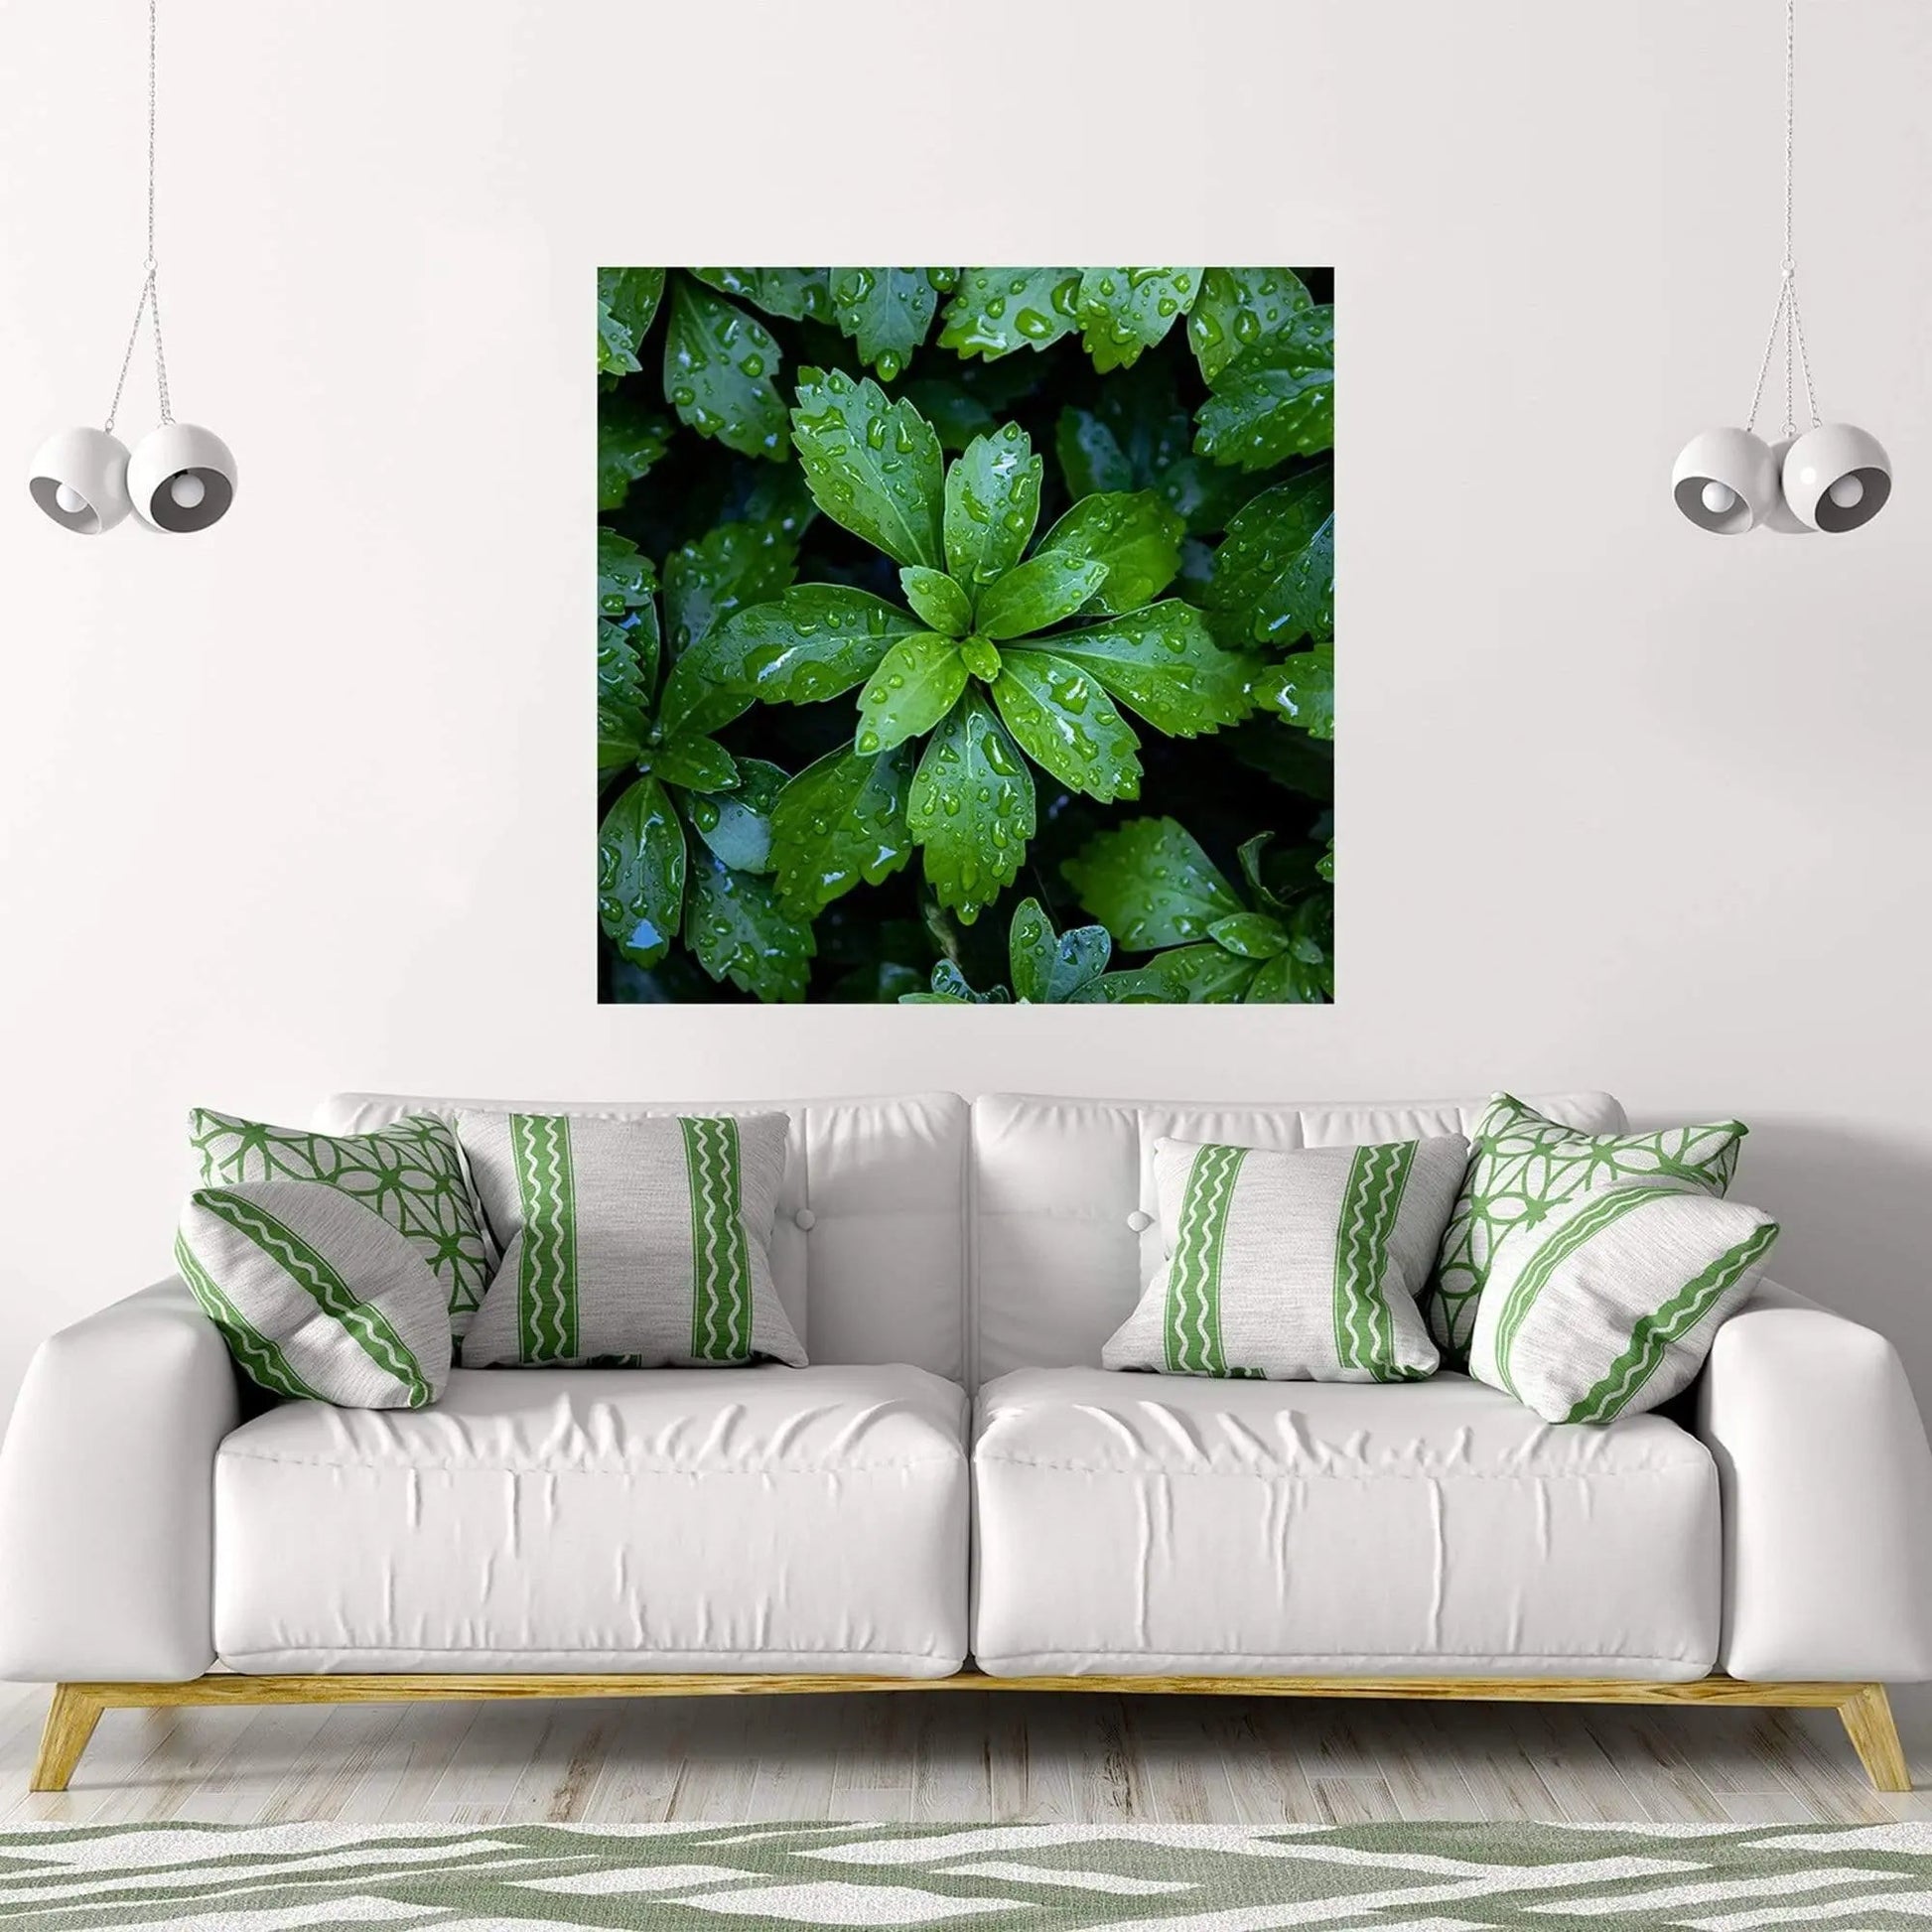 Art of bright green leaves covered in raindrops is the focus over a white couch with green accent pillows